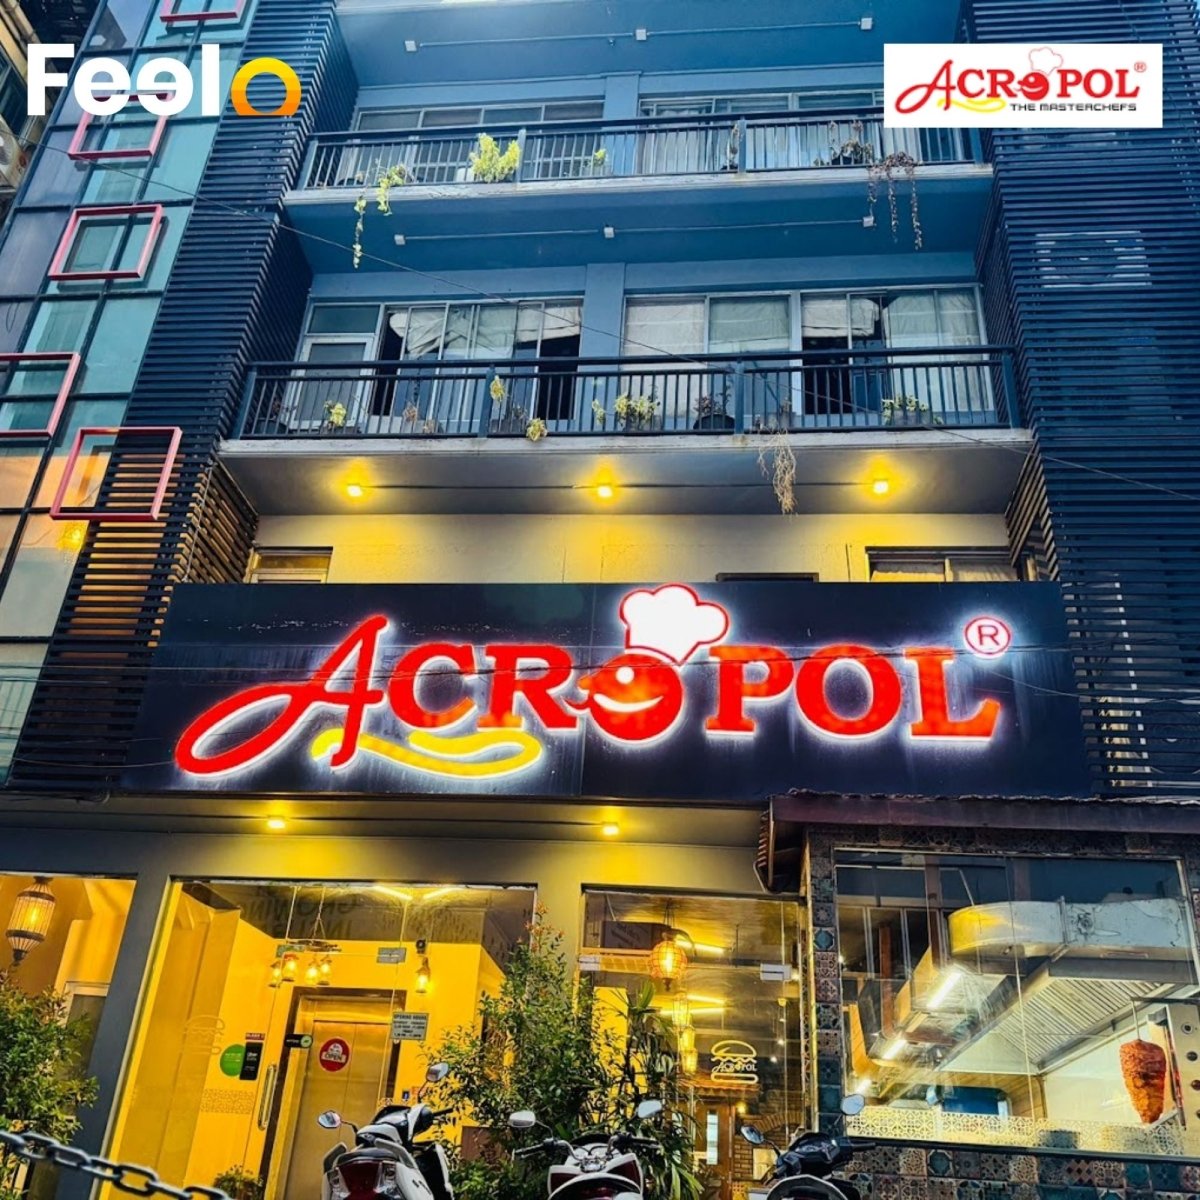 1x Chicken or Beef Large Nasi Goreng for 2 people - Acropol Restaurant, Colombo 03 | Feelo